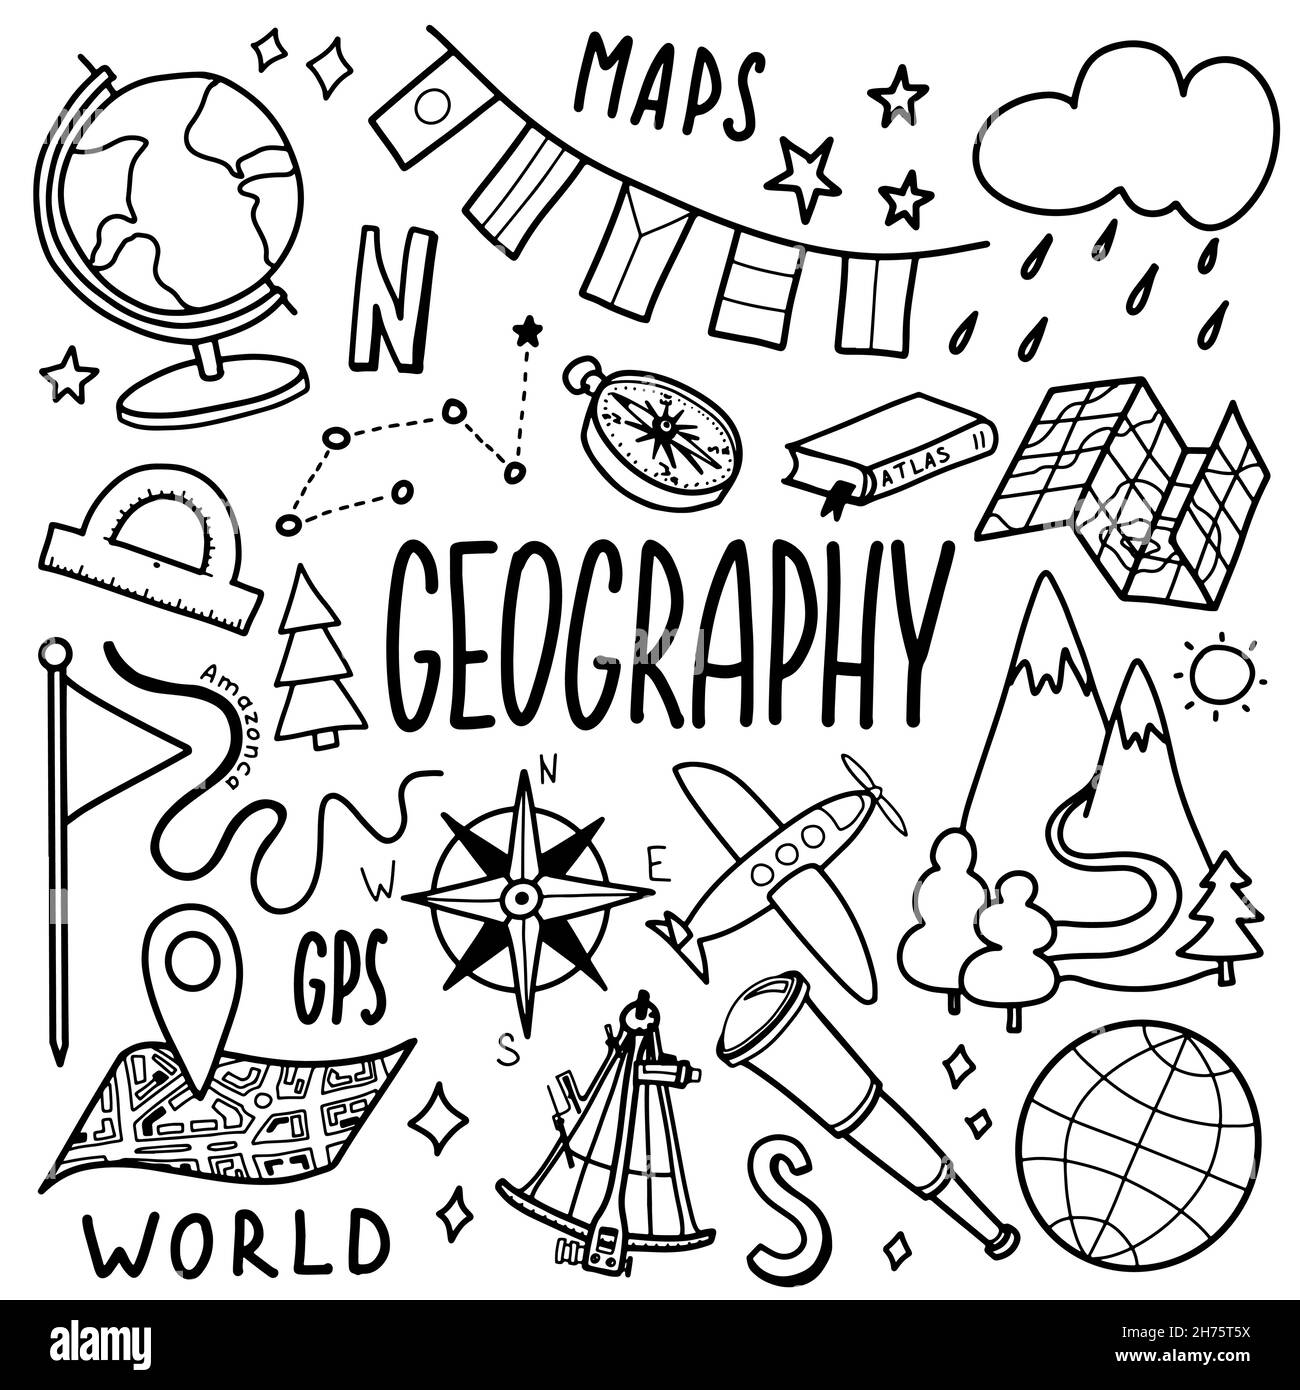 Geography symbols icons set. School subject design. Education outline sketch in doodle style. Study, science concept. Back to school background for Stock Vector